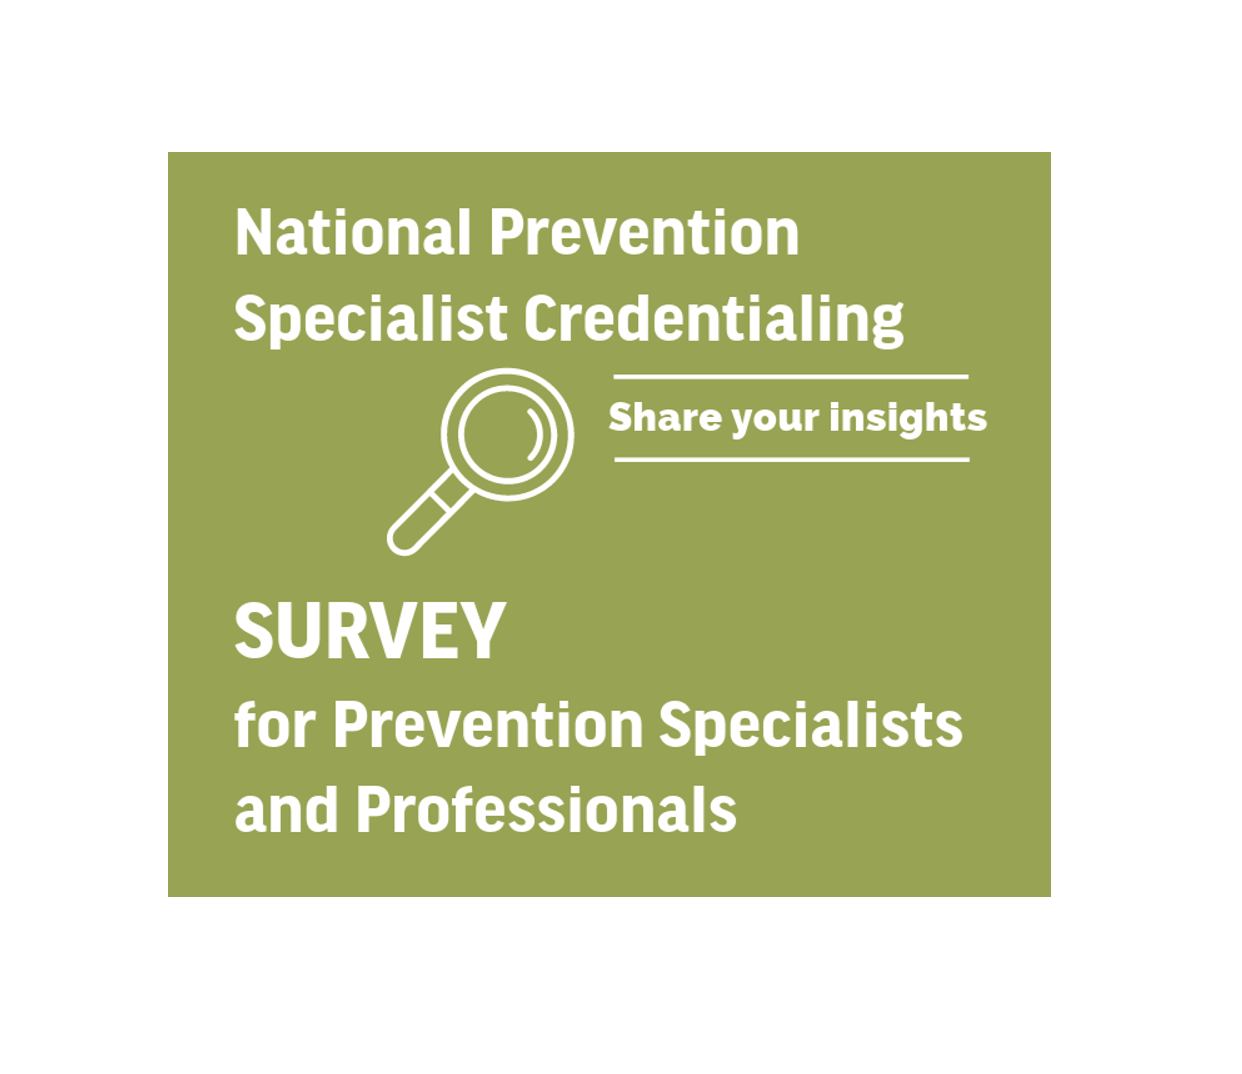 National Prevention Specialist Credentialing Survey for Prevention Specialists and Professionals